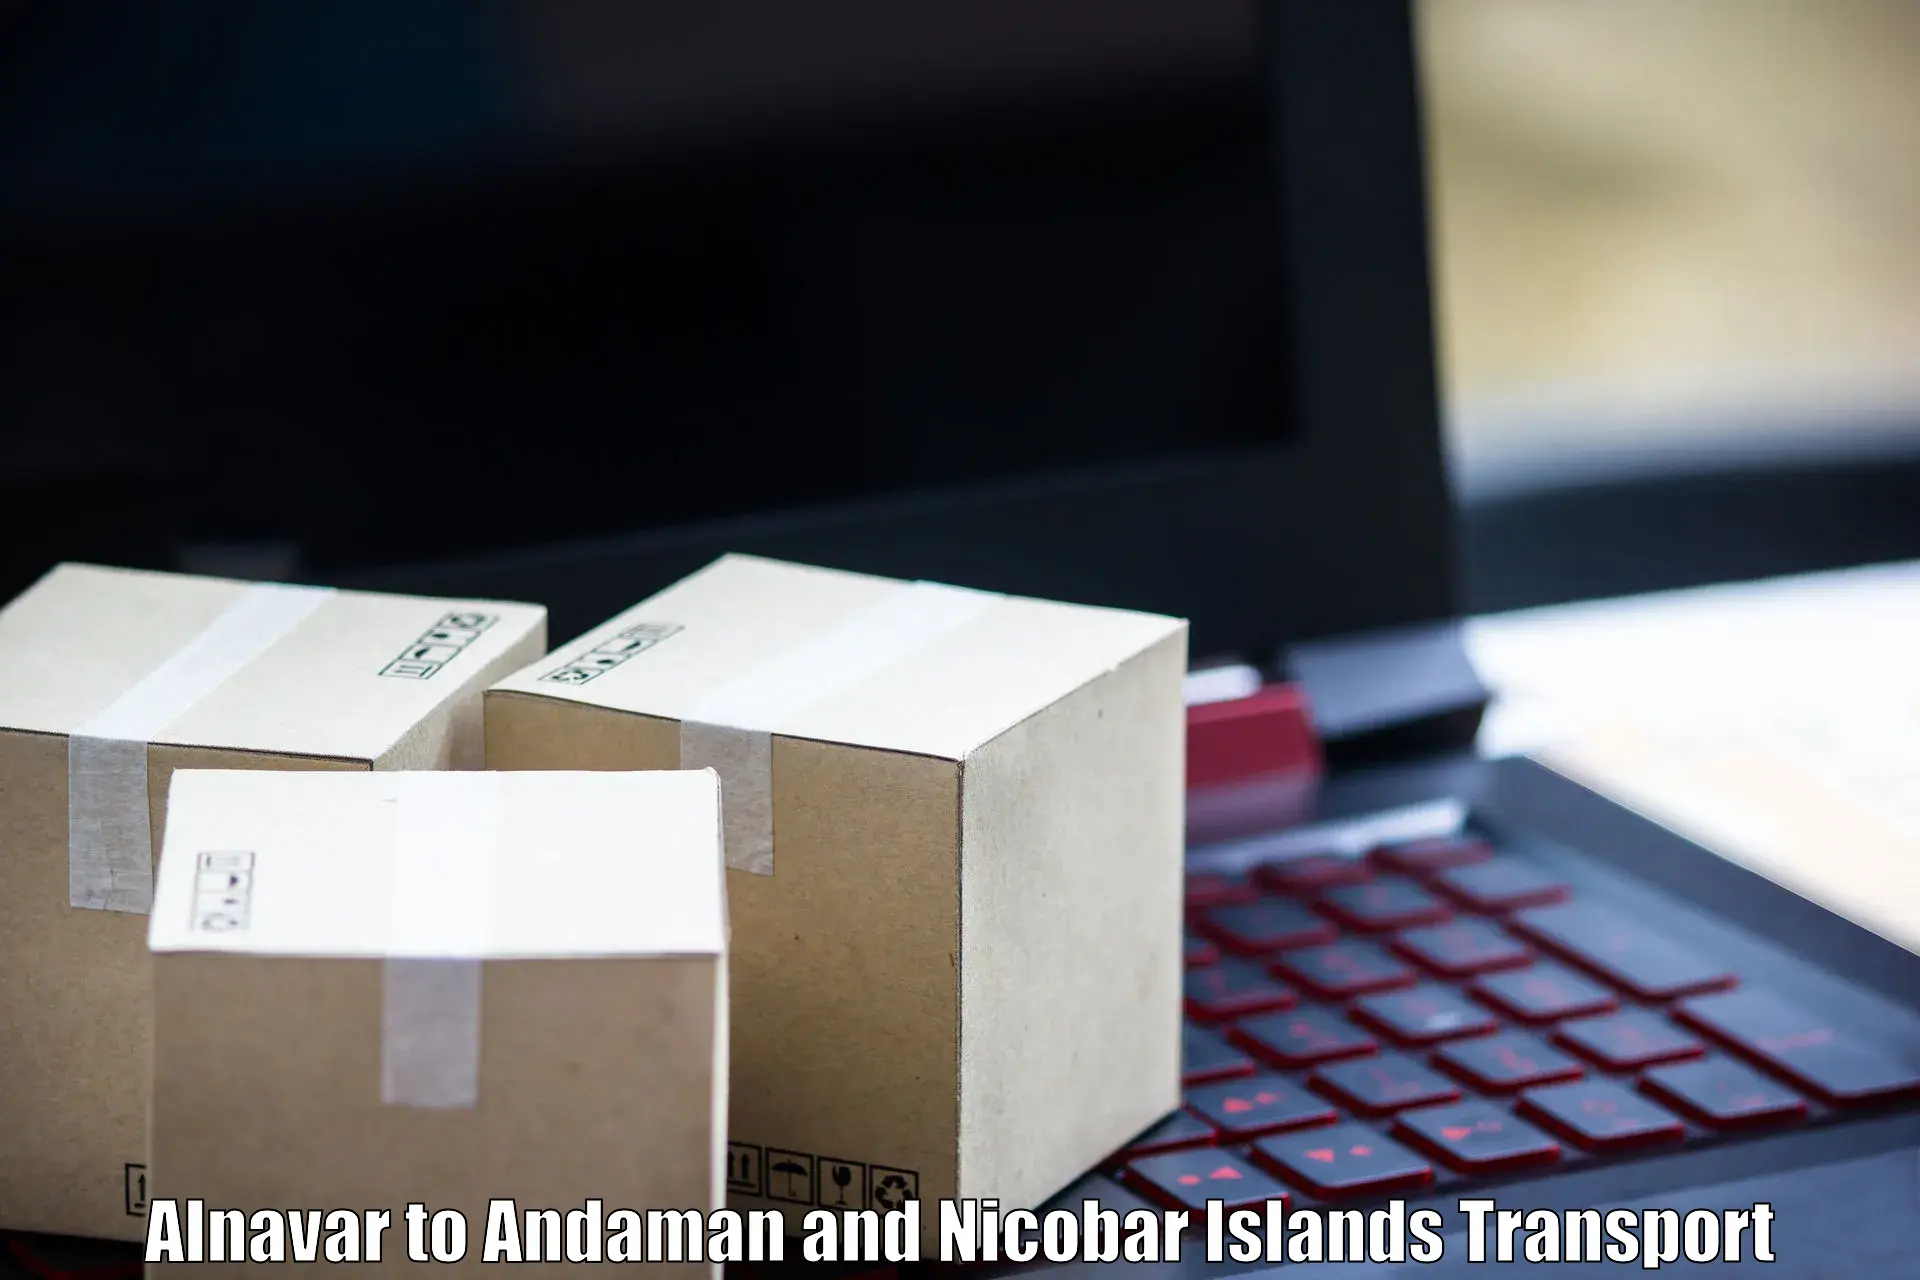 Road transport online services Alnavar to Andaman and Nicobar Islands